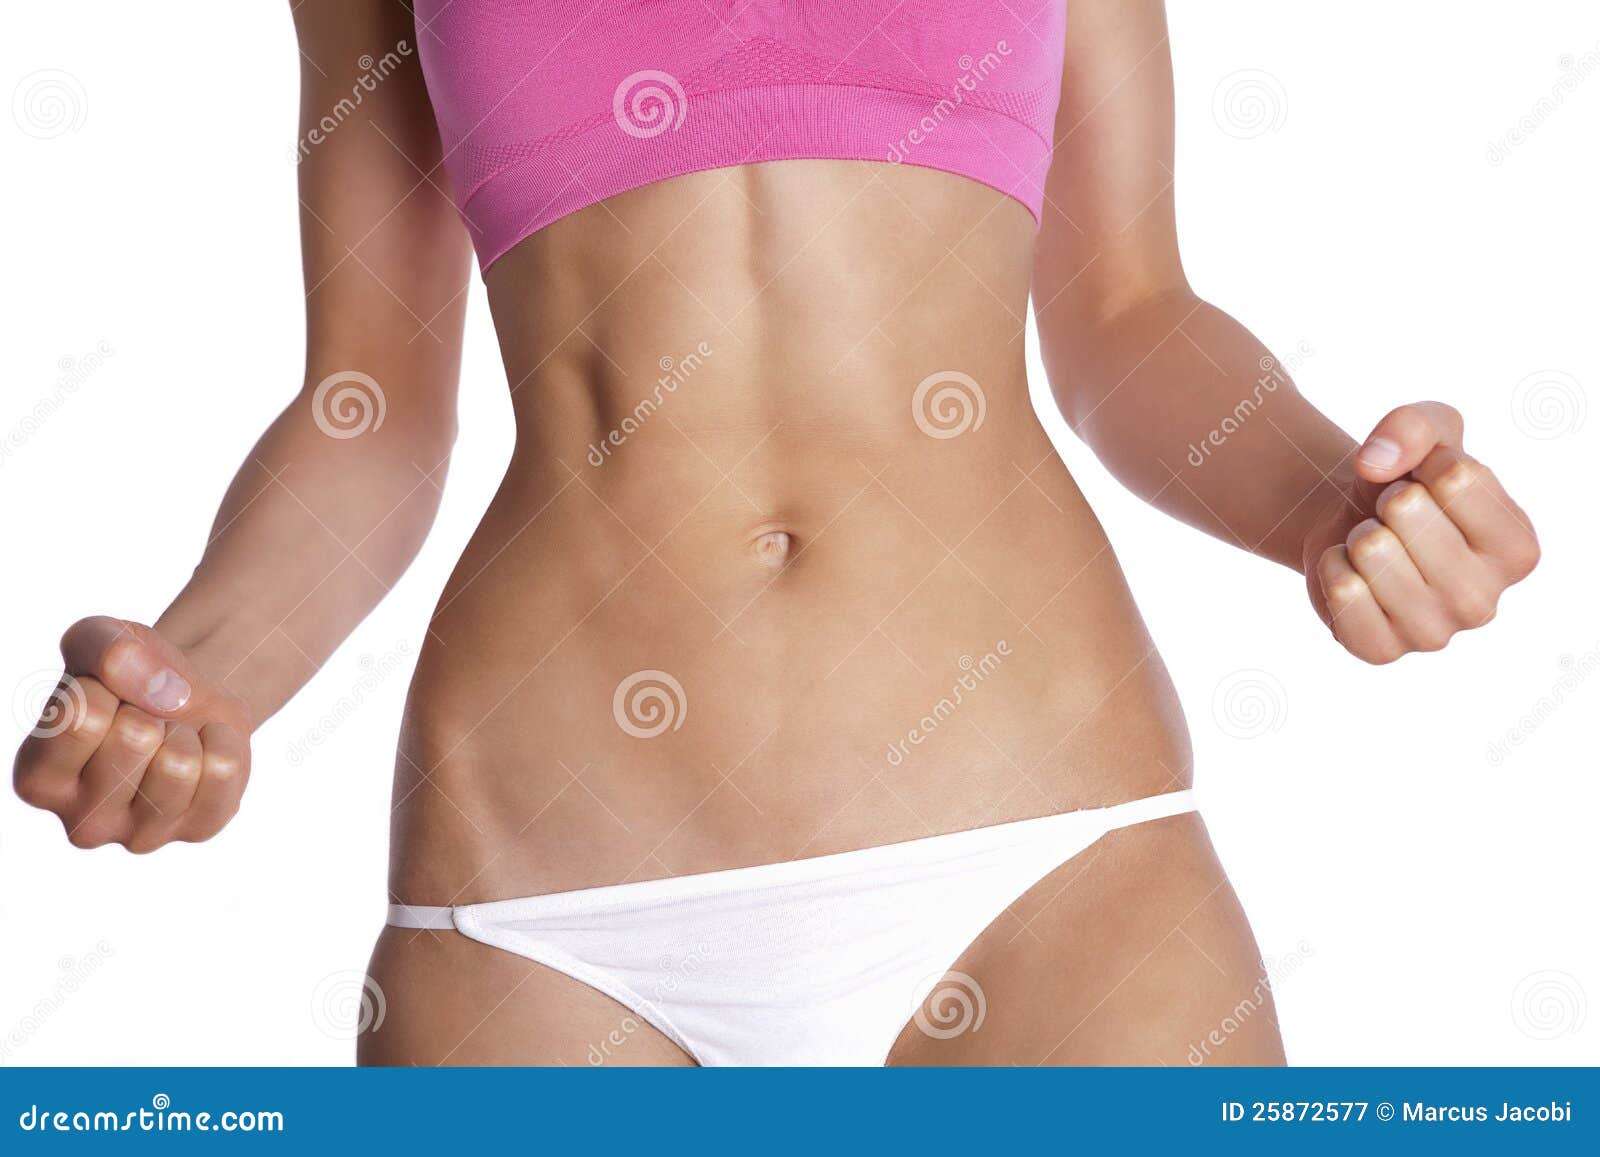 Females abdominal muscles stock image. Image of power - 25872577